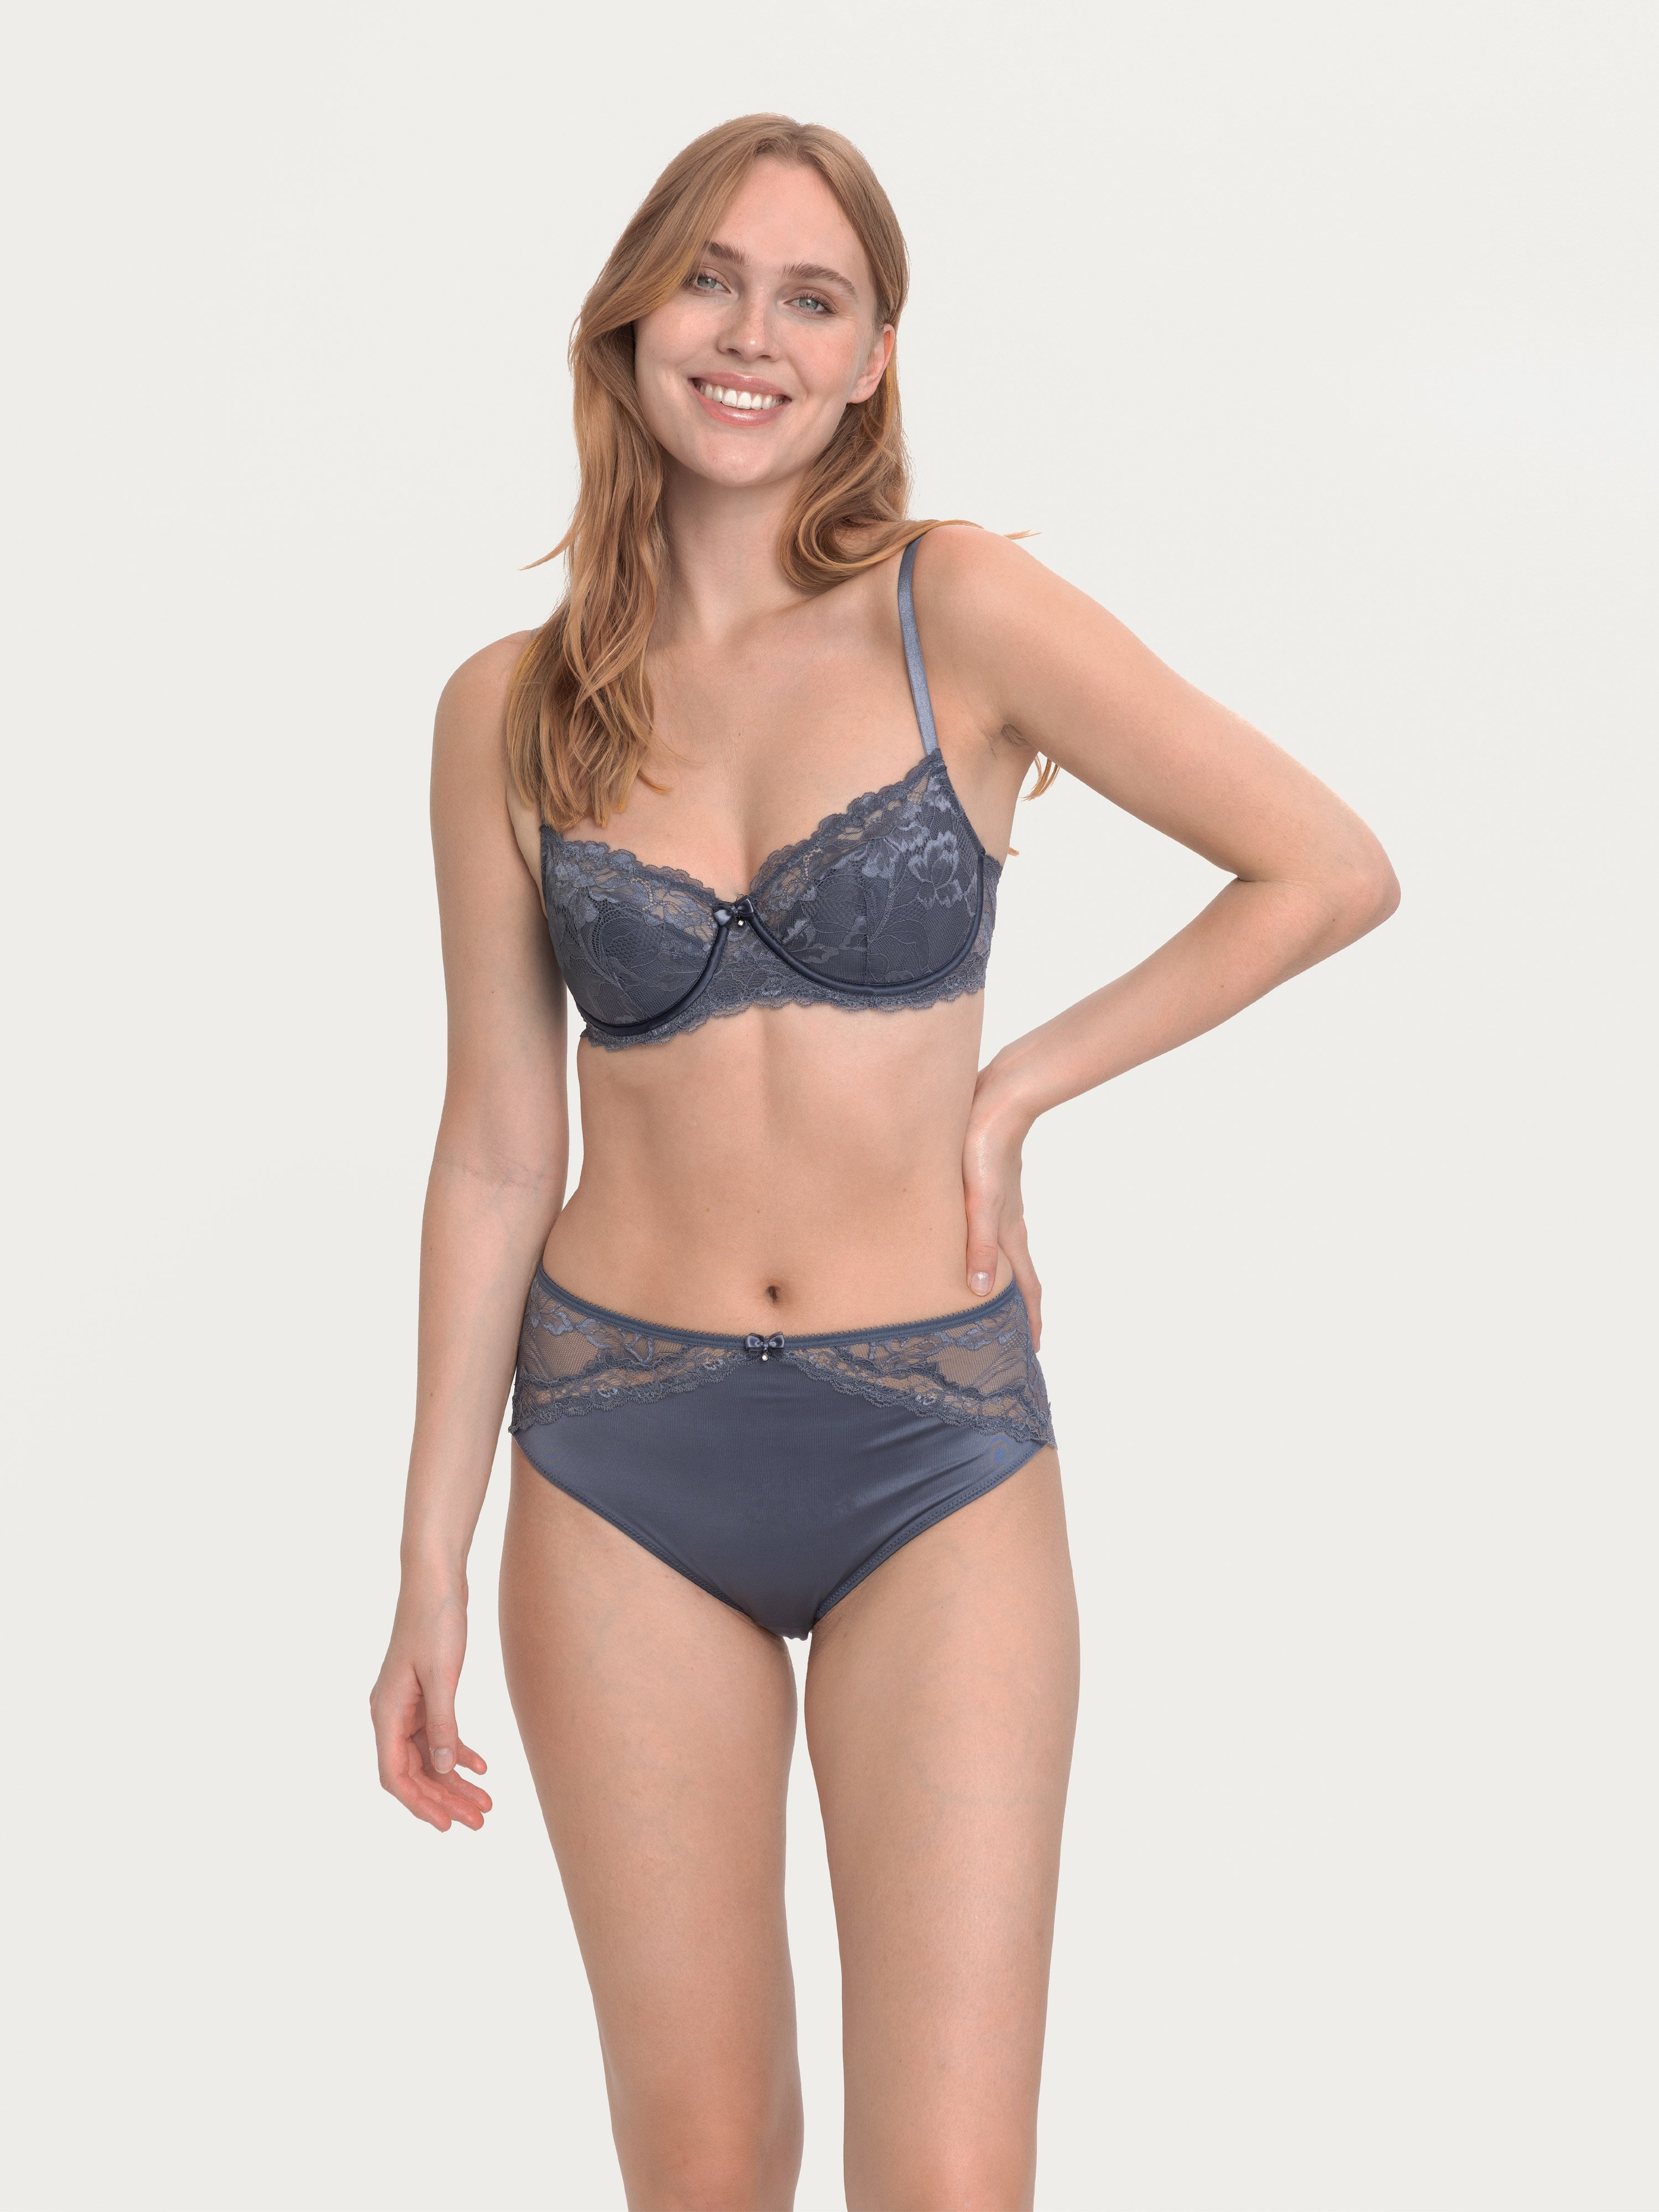 Lepel Balconette bra with pre-formed underwire Spacer 801 Moon cup C: for  sale at 26.99€ on